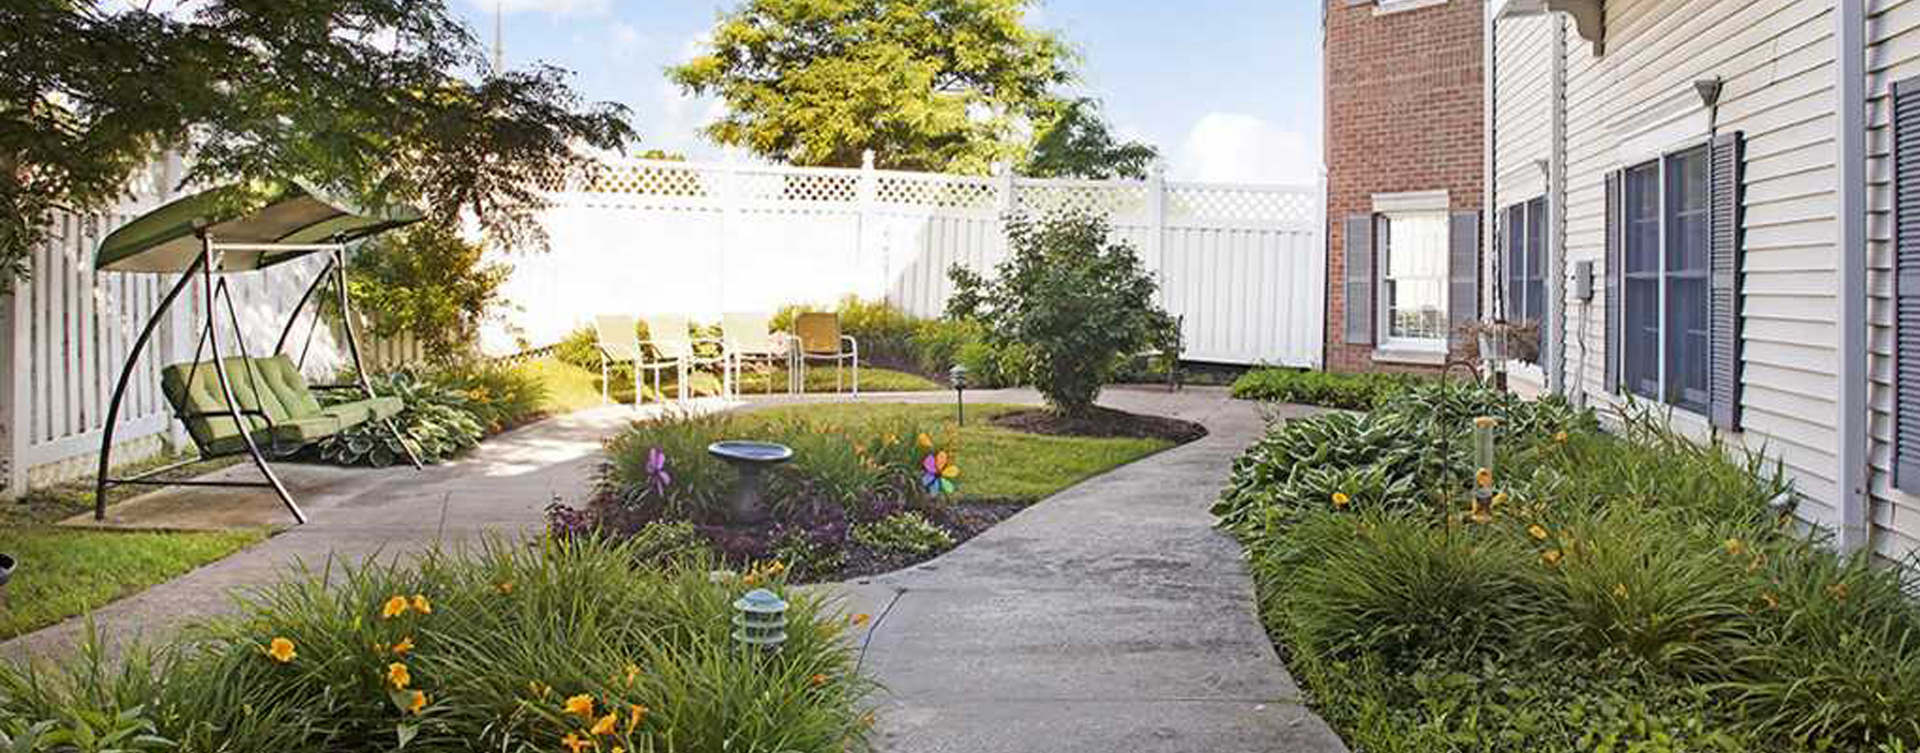 Enjoy bird watching, gardening and barbecuing in our courtyard at Bickford of Rocky River